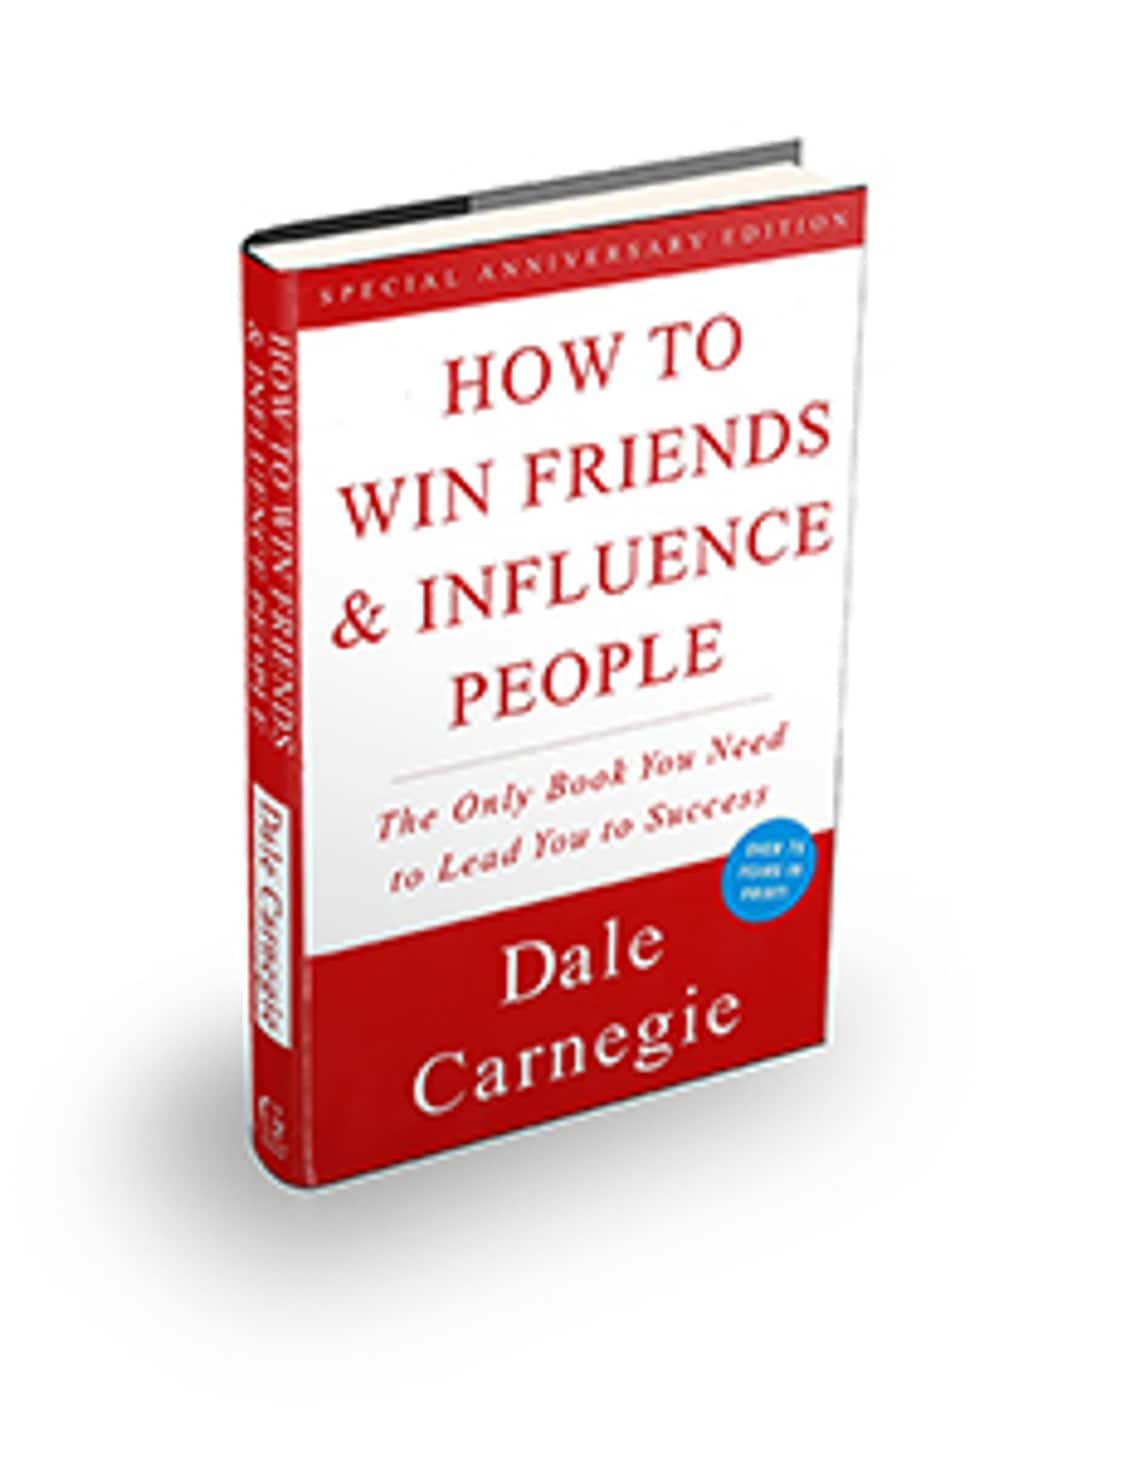 5 Ways How to Influence Others by Writing Online